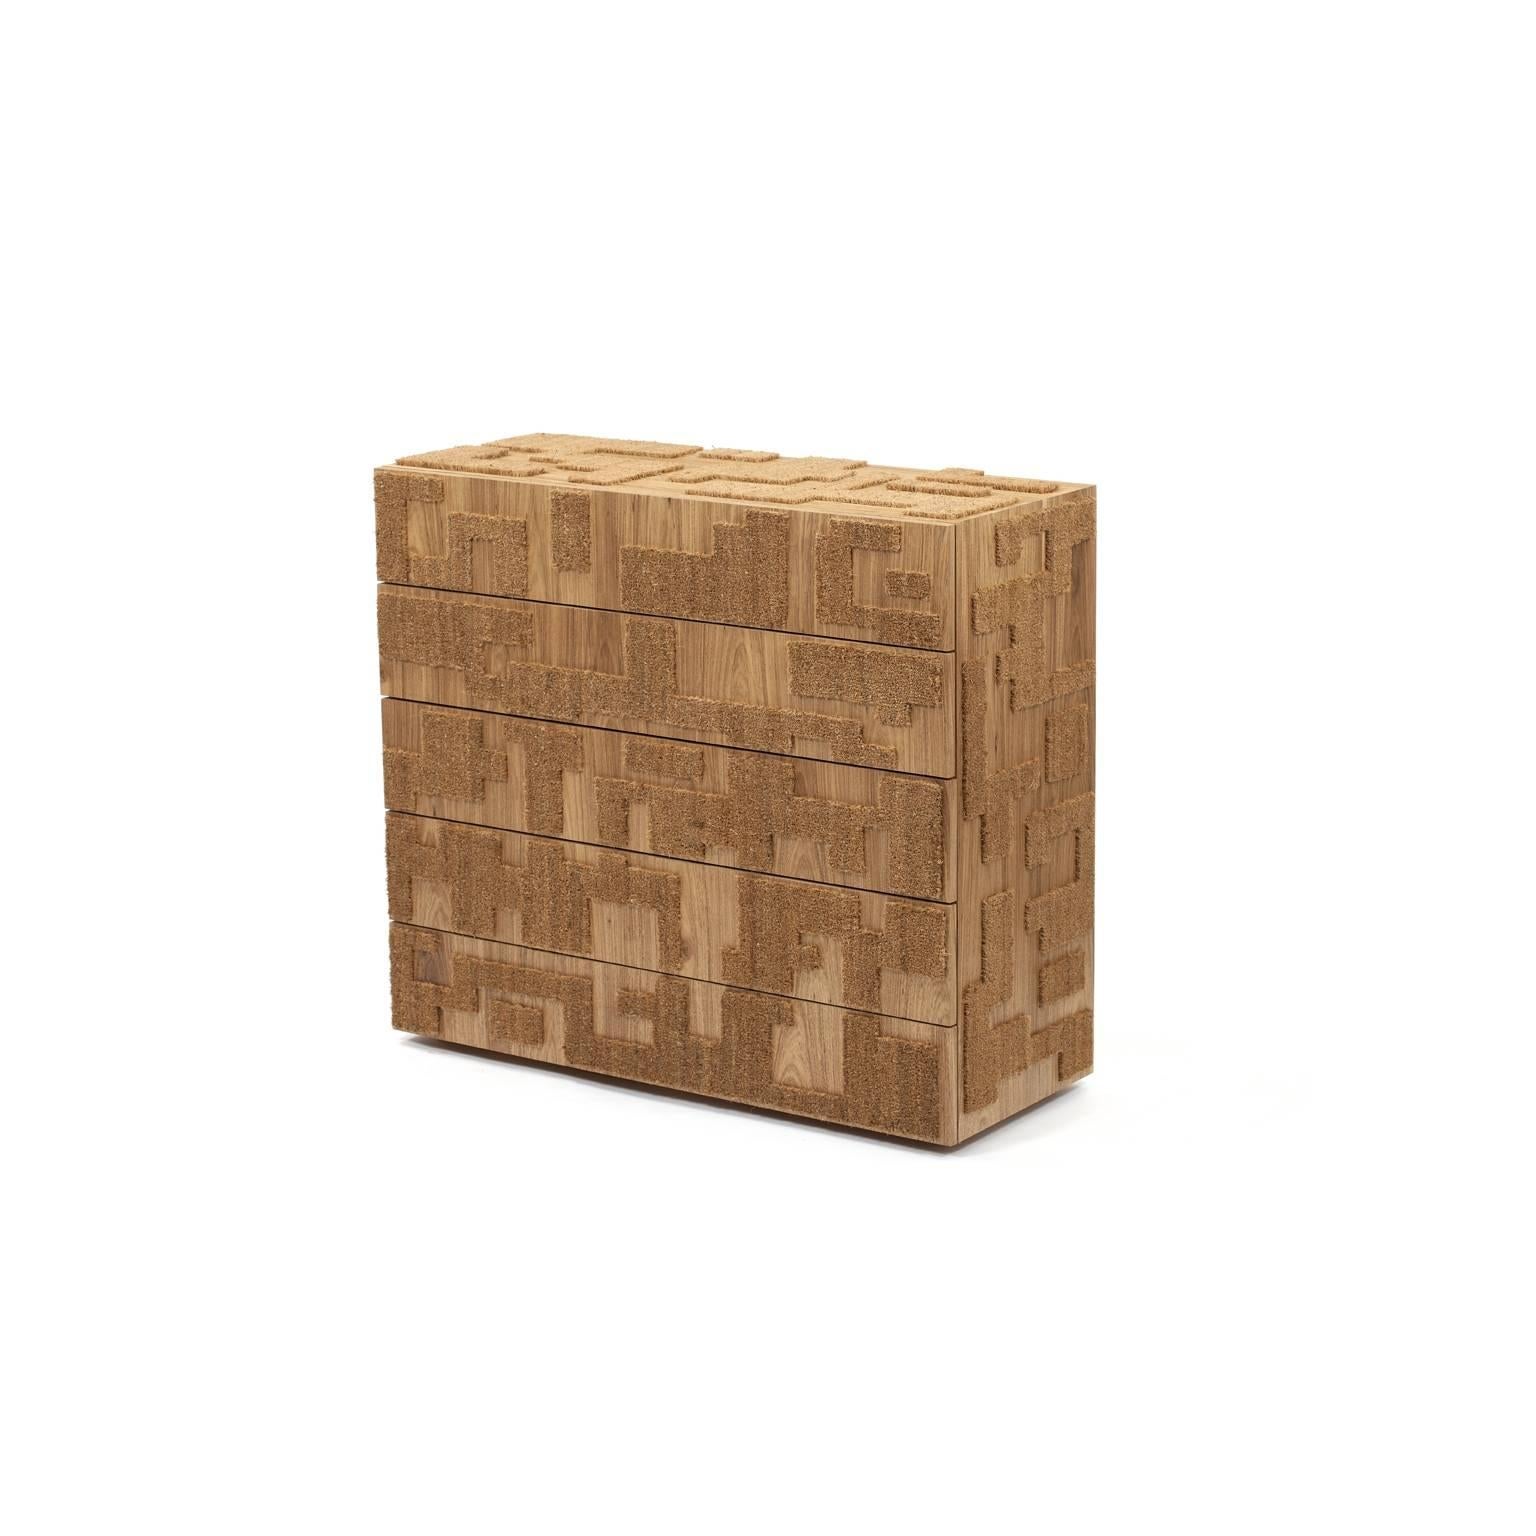 This wooden contemporary chest of drawers is finished with Louro Freijó veneer and coconut fiber mat.
This piece is the result of artisanal production process, which makes it extremely unique. Therefore, any irregularities should not be considered